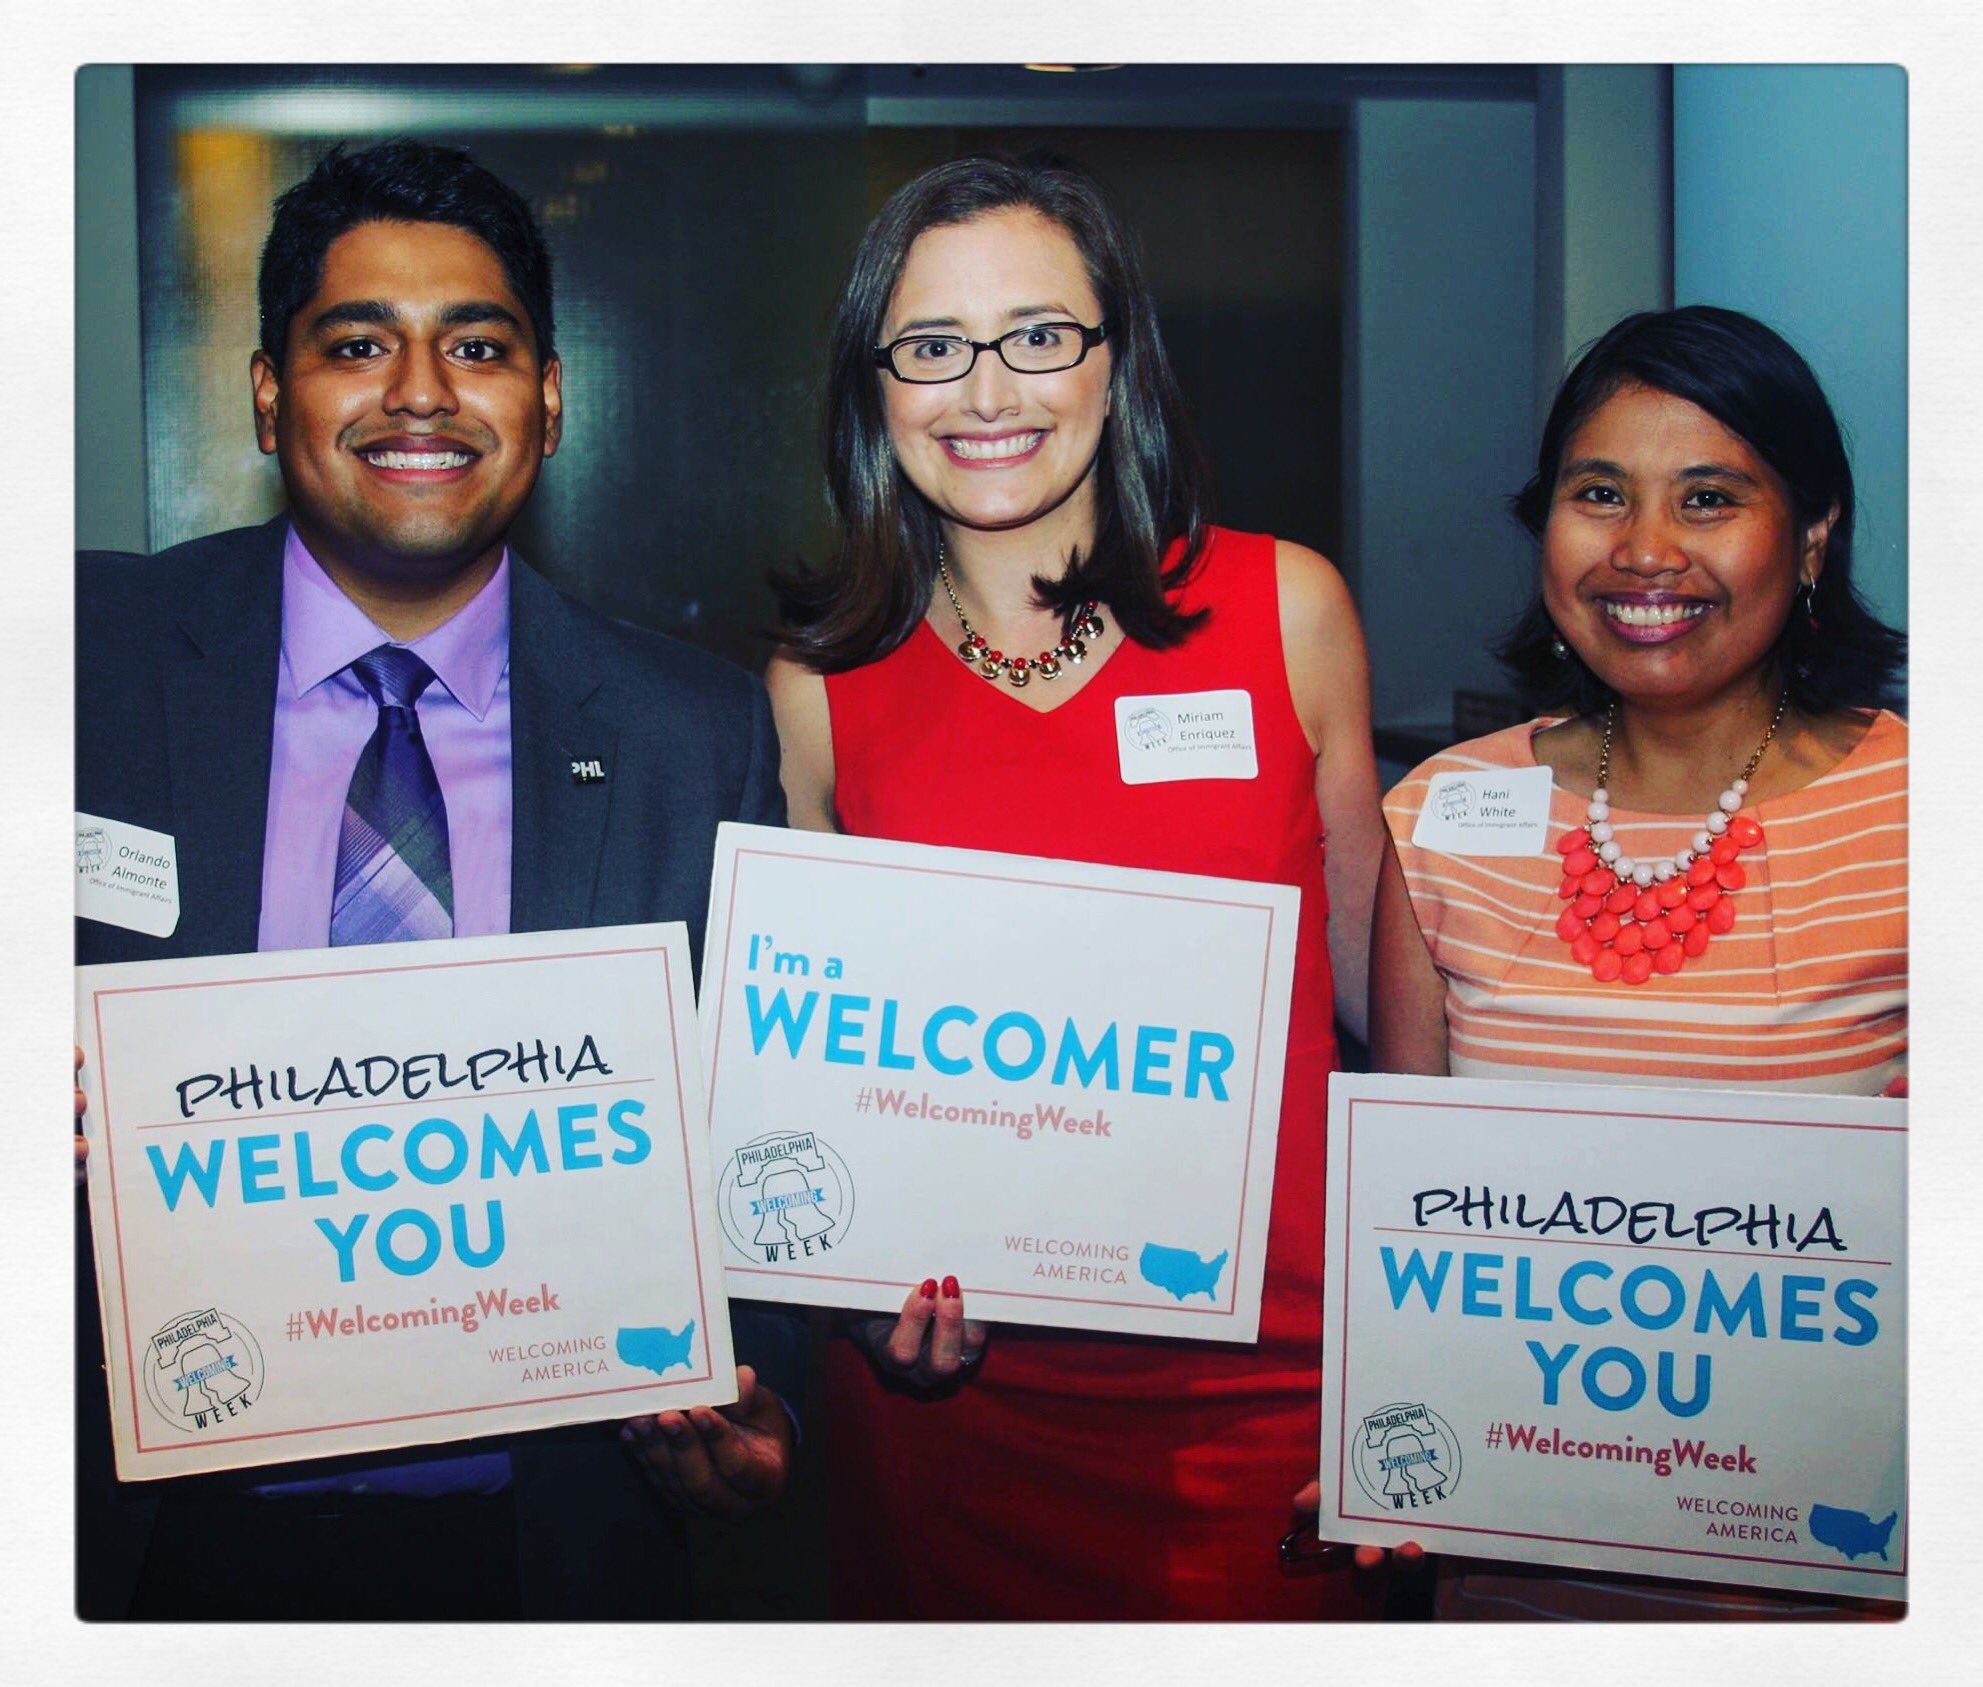 The Office of Immigrant Affairs team poses for a picture during Welcoming Week 2016, a week-long celebration focusing on making sure Philadelphia is a welcoming place for newcomers.